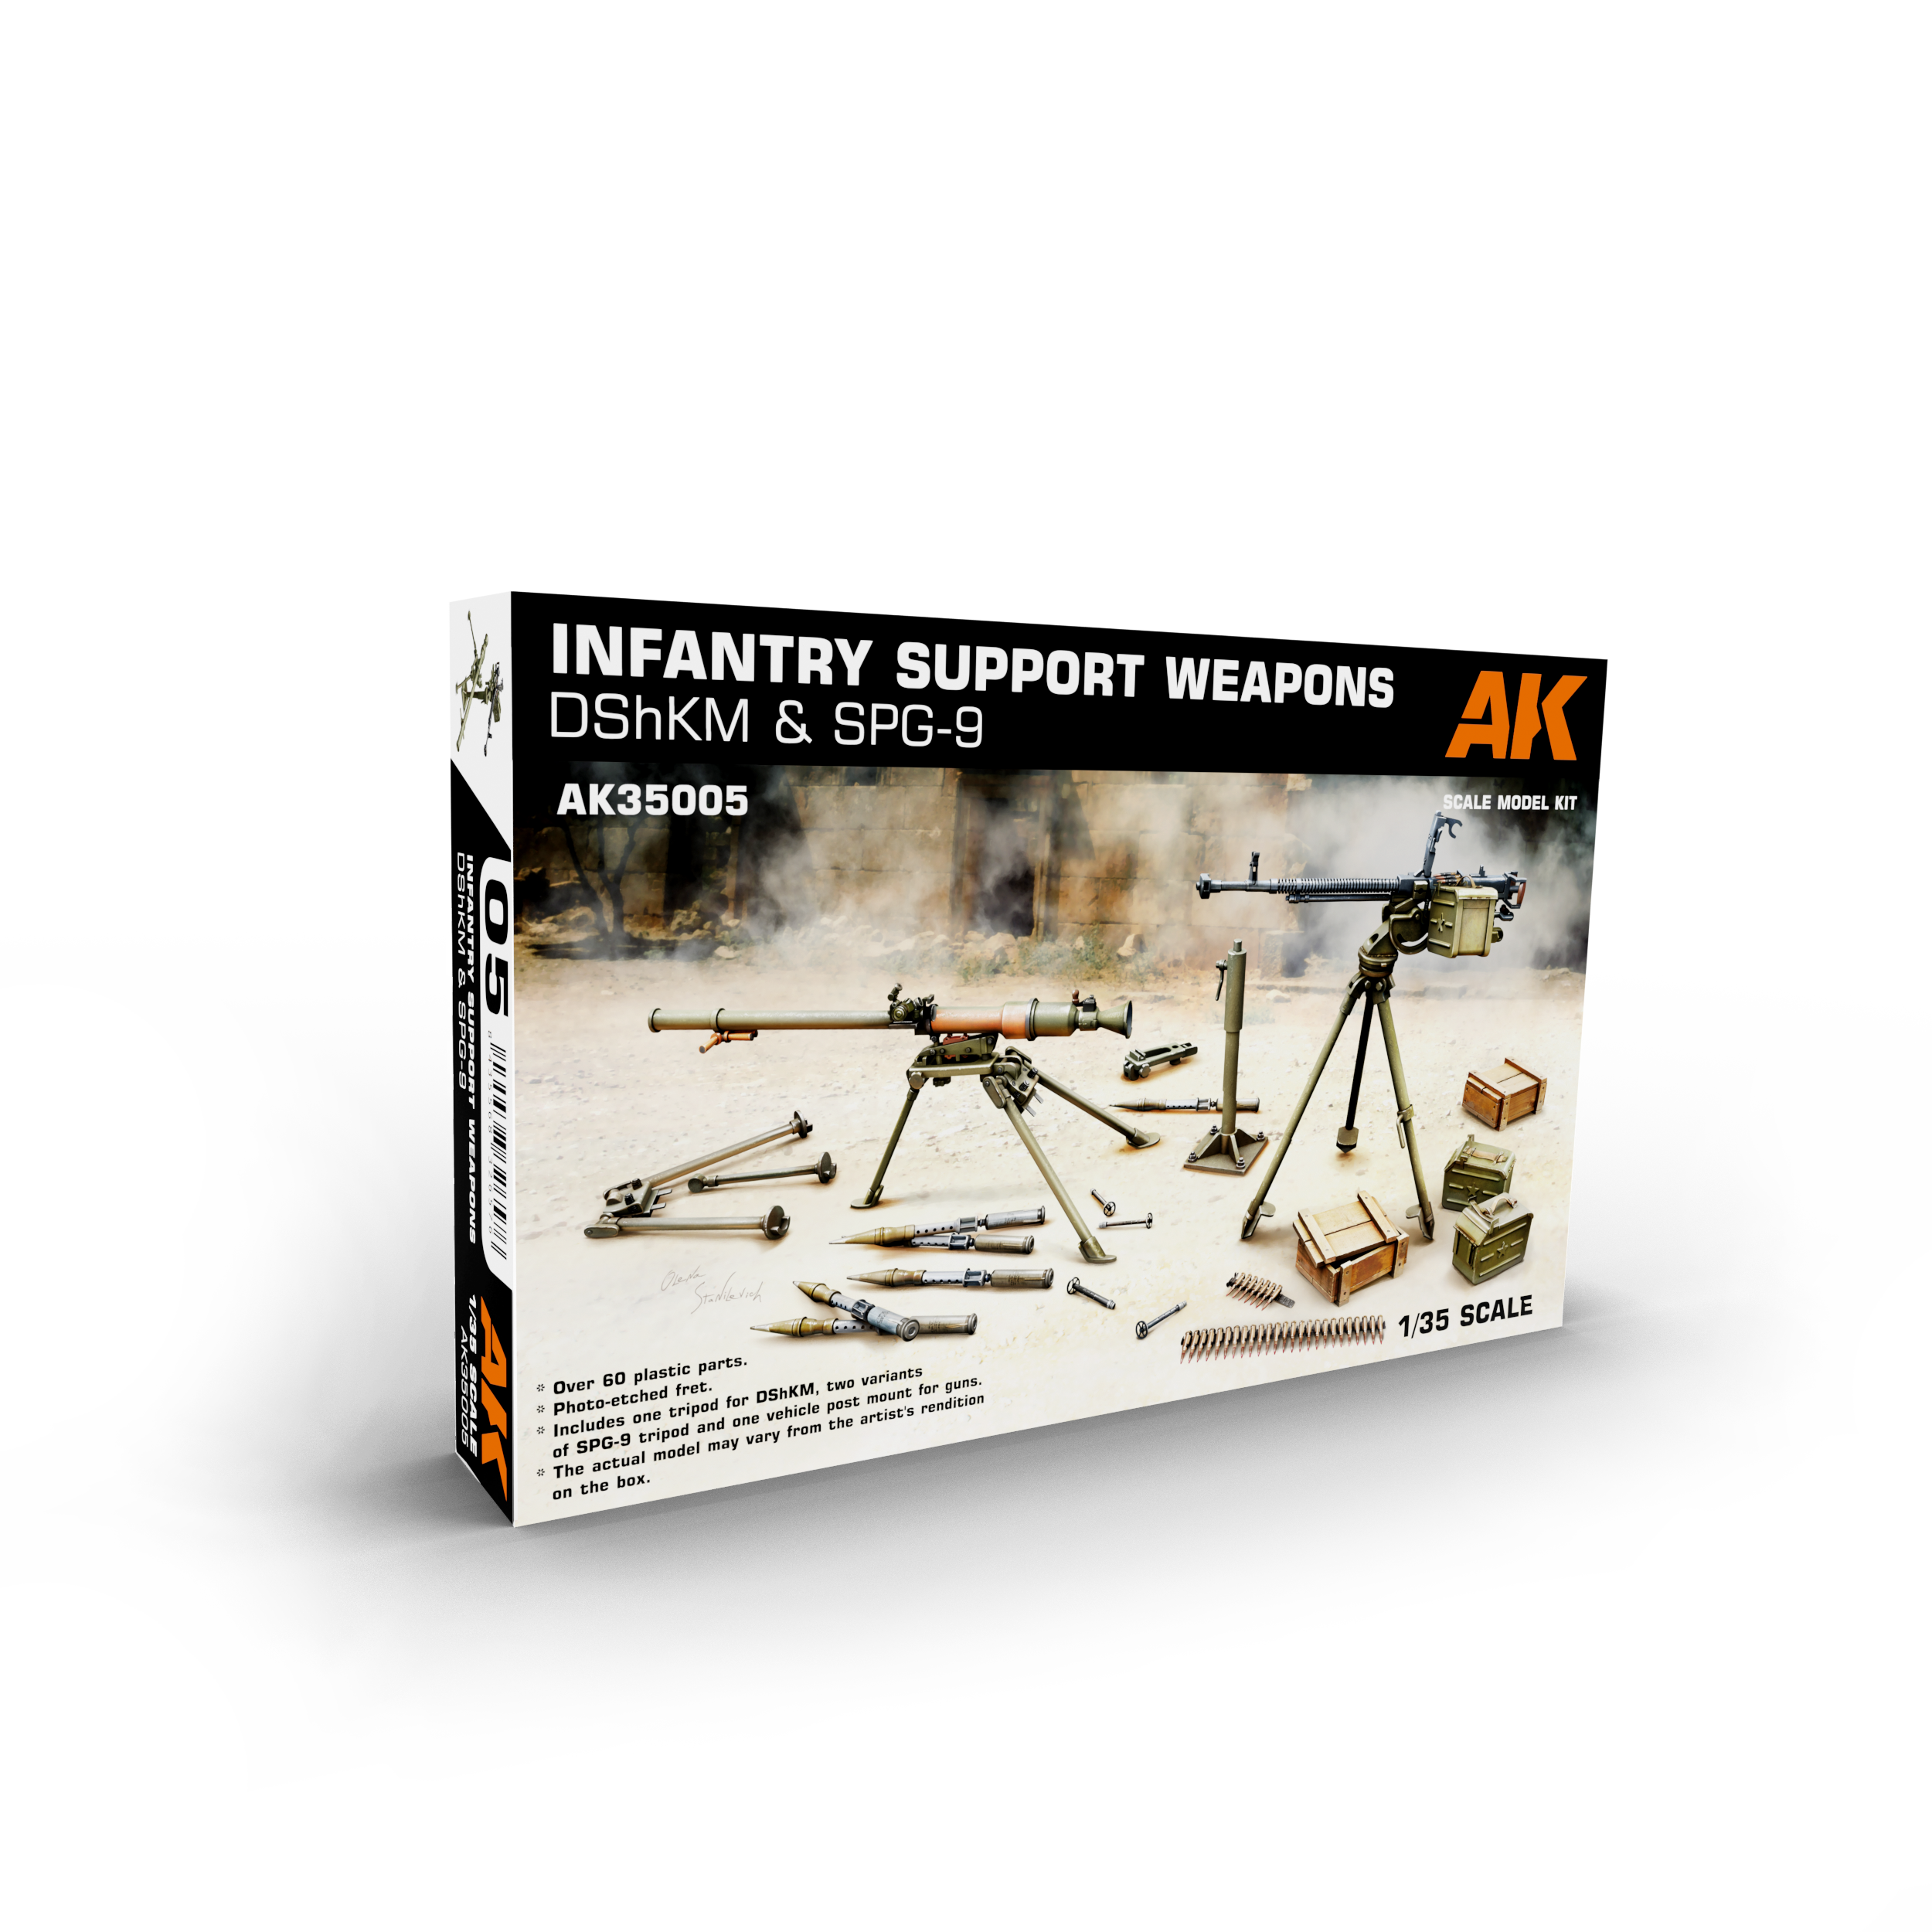 Infantry Support Weapon Set 1: DShKM & SPG-9 1/35 #AK35005 by AK Interactive